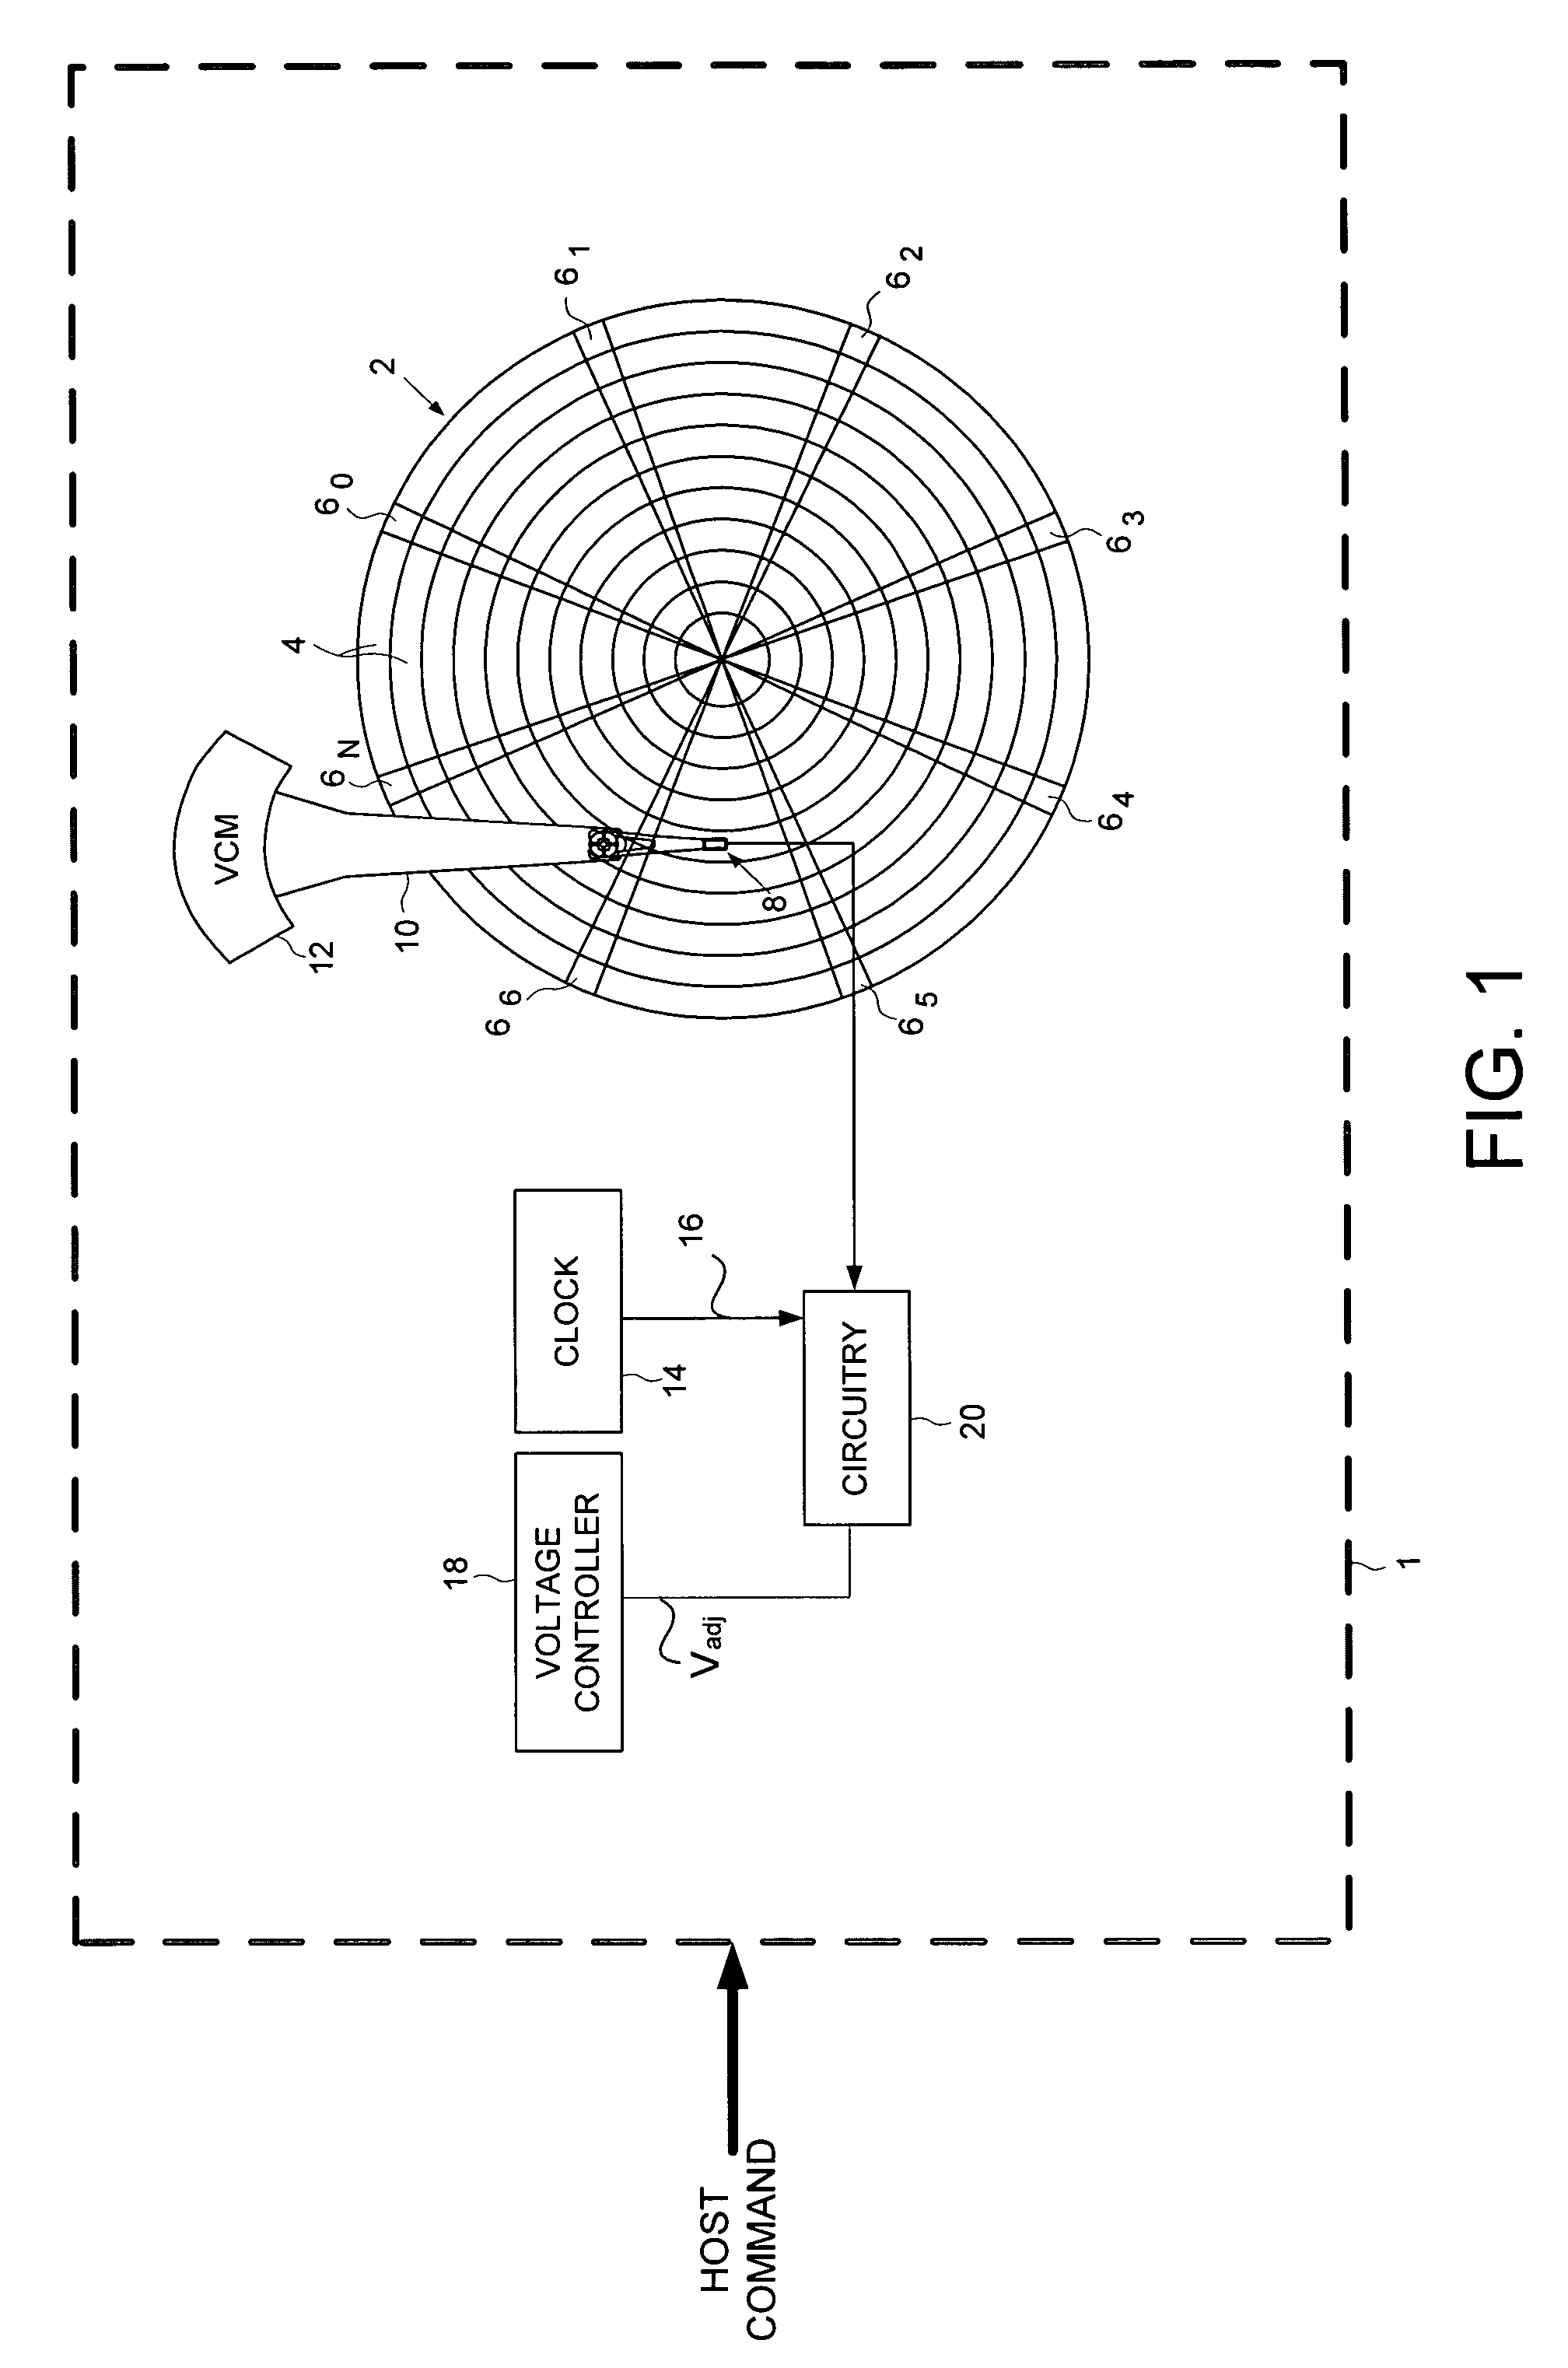 Adjusting voltage delivered to disk drive circuitry based on a selected zone